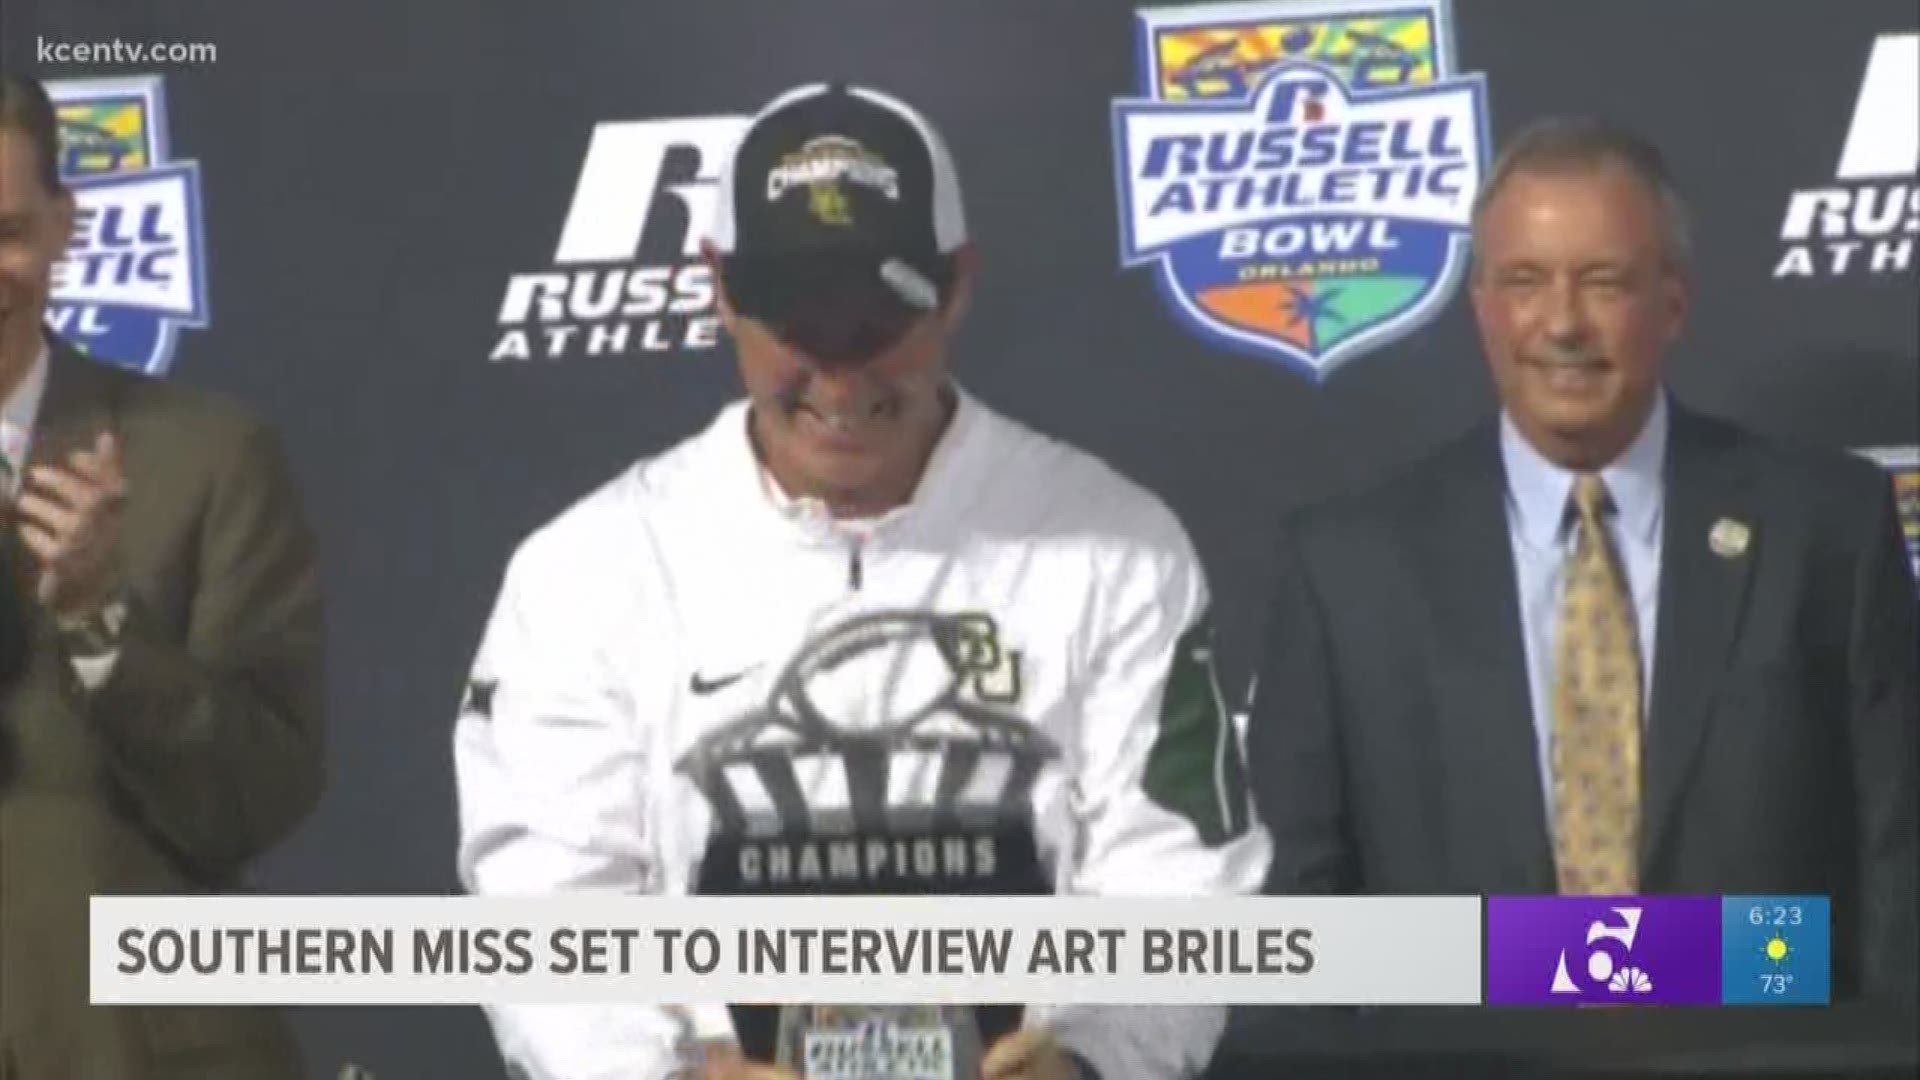 Briles is set to interview for Southern Mississippi's vacant offensive coordinator position.